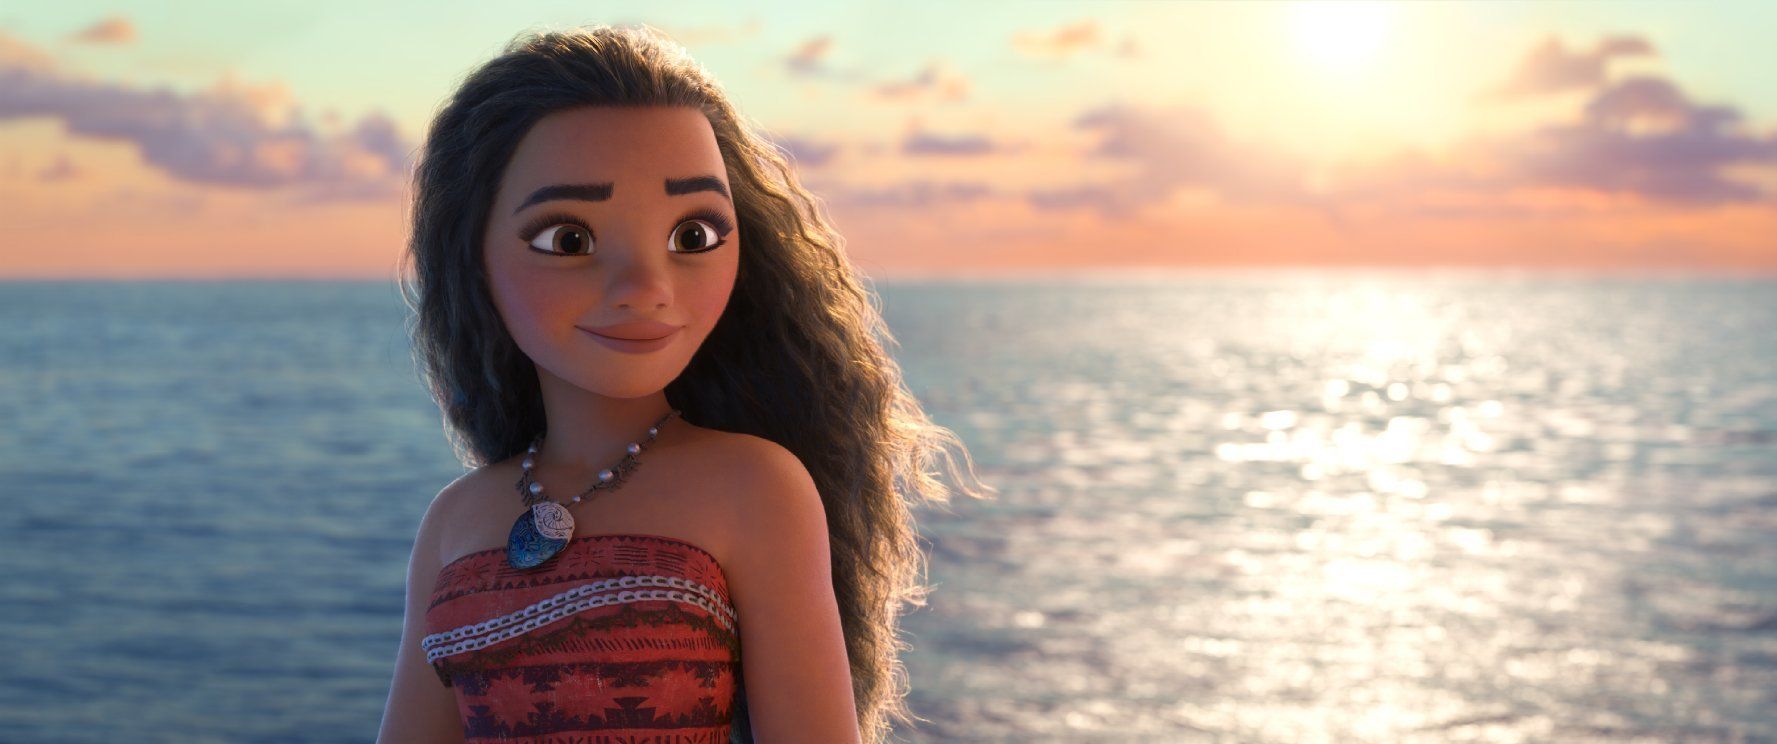 20 Inspiring Kids Movies That Your Kids Will Love to Watch This Weekend